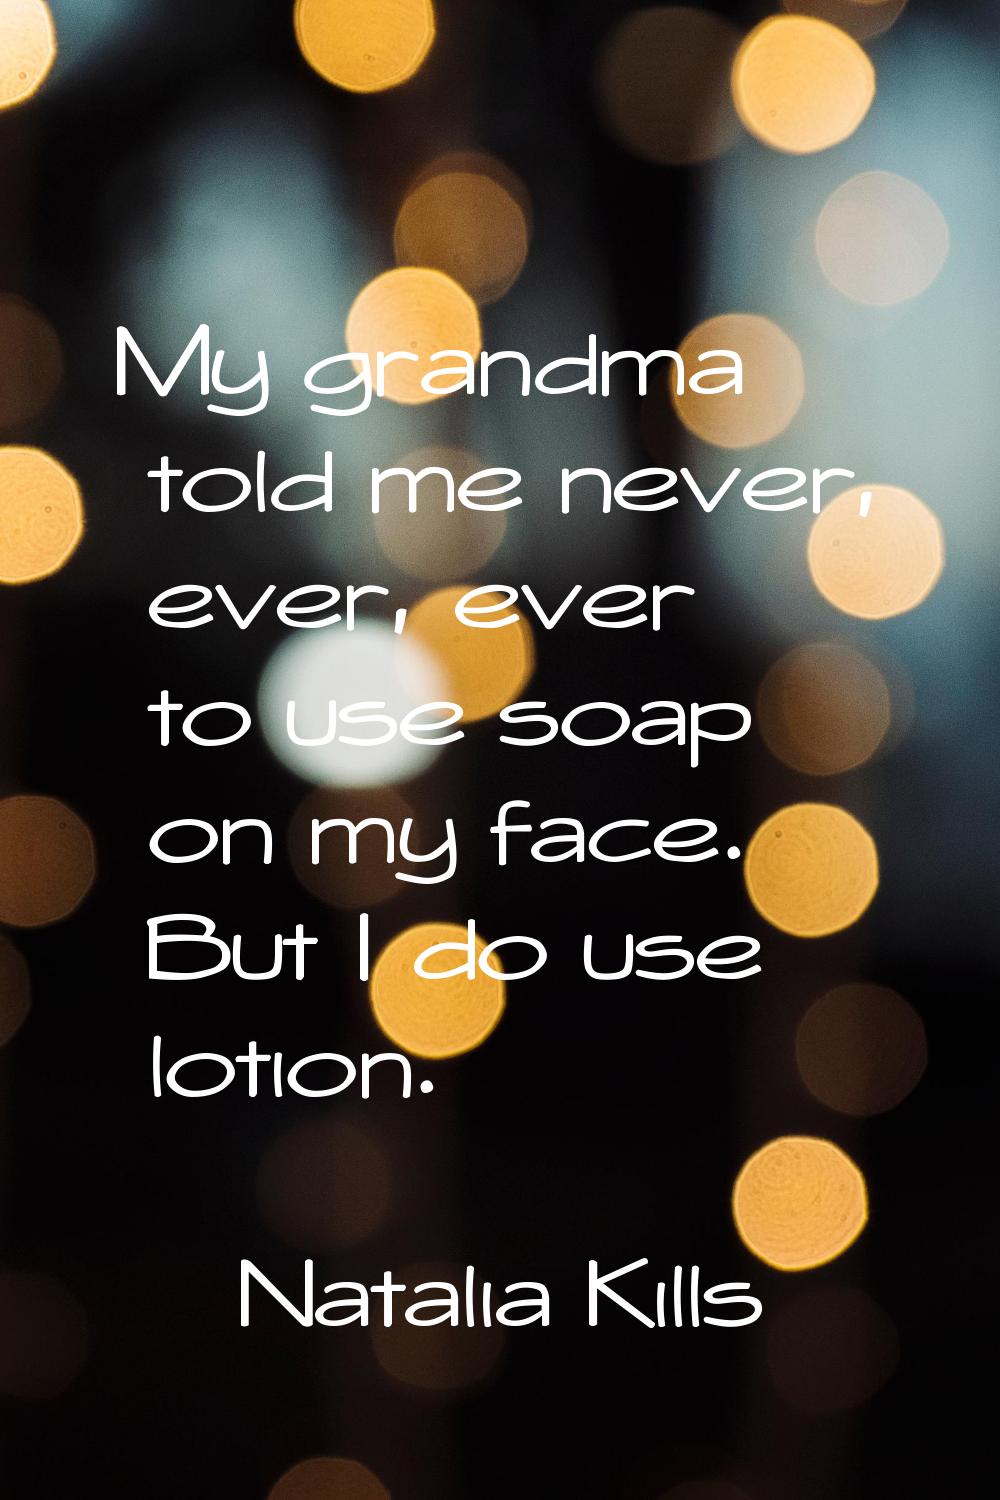 My grandma told me never, ever, ever to use soap on my face. But I do use lotion.